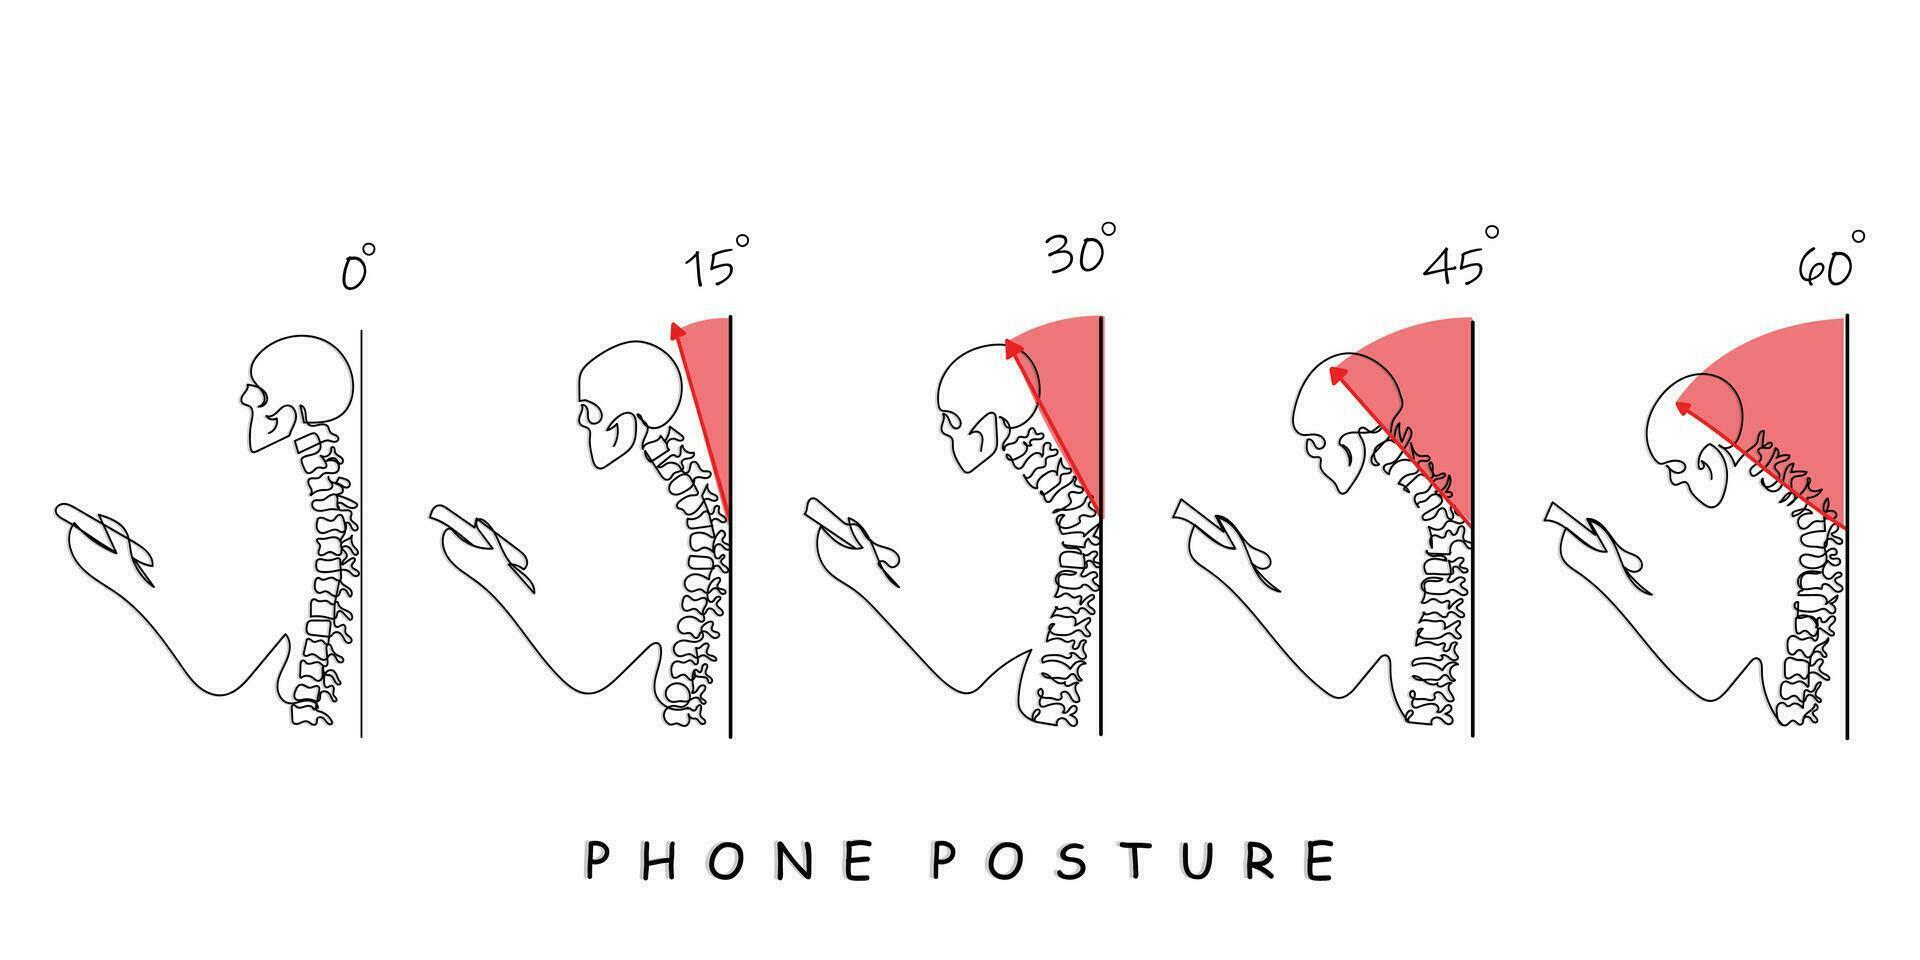 Phone posture while standing for correct spine and neck angle outline diagram vector